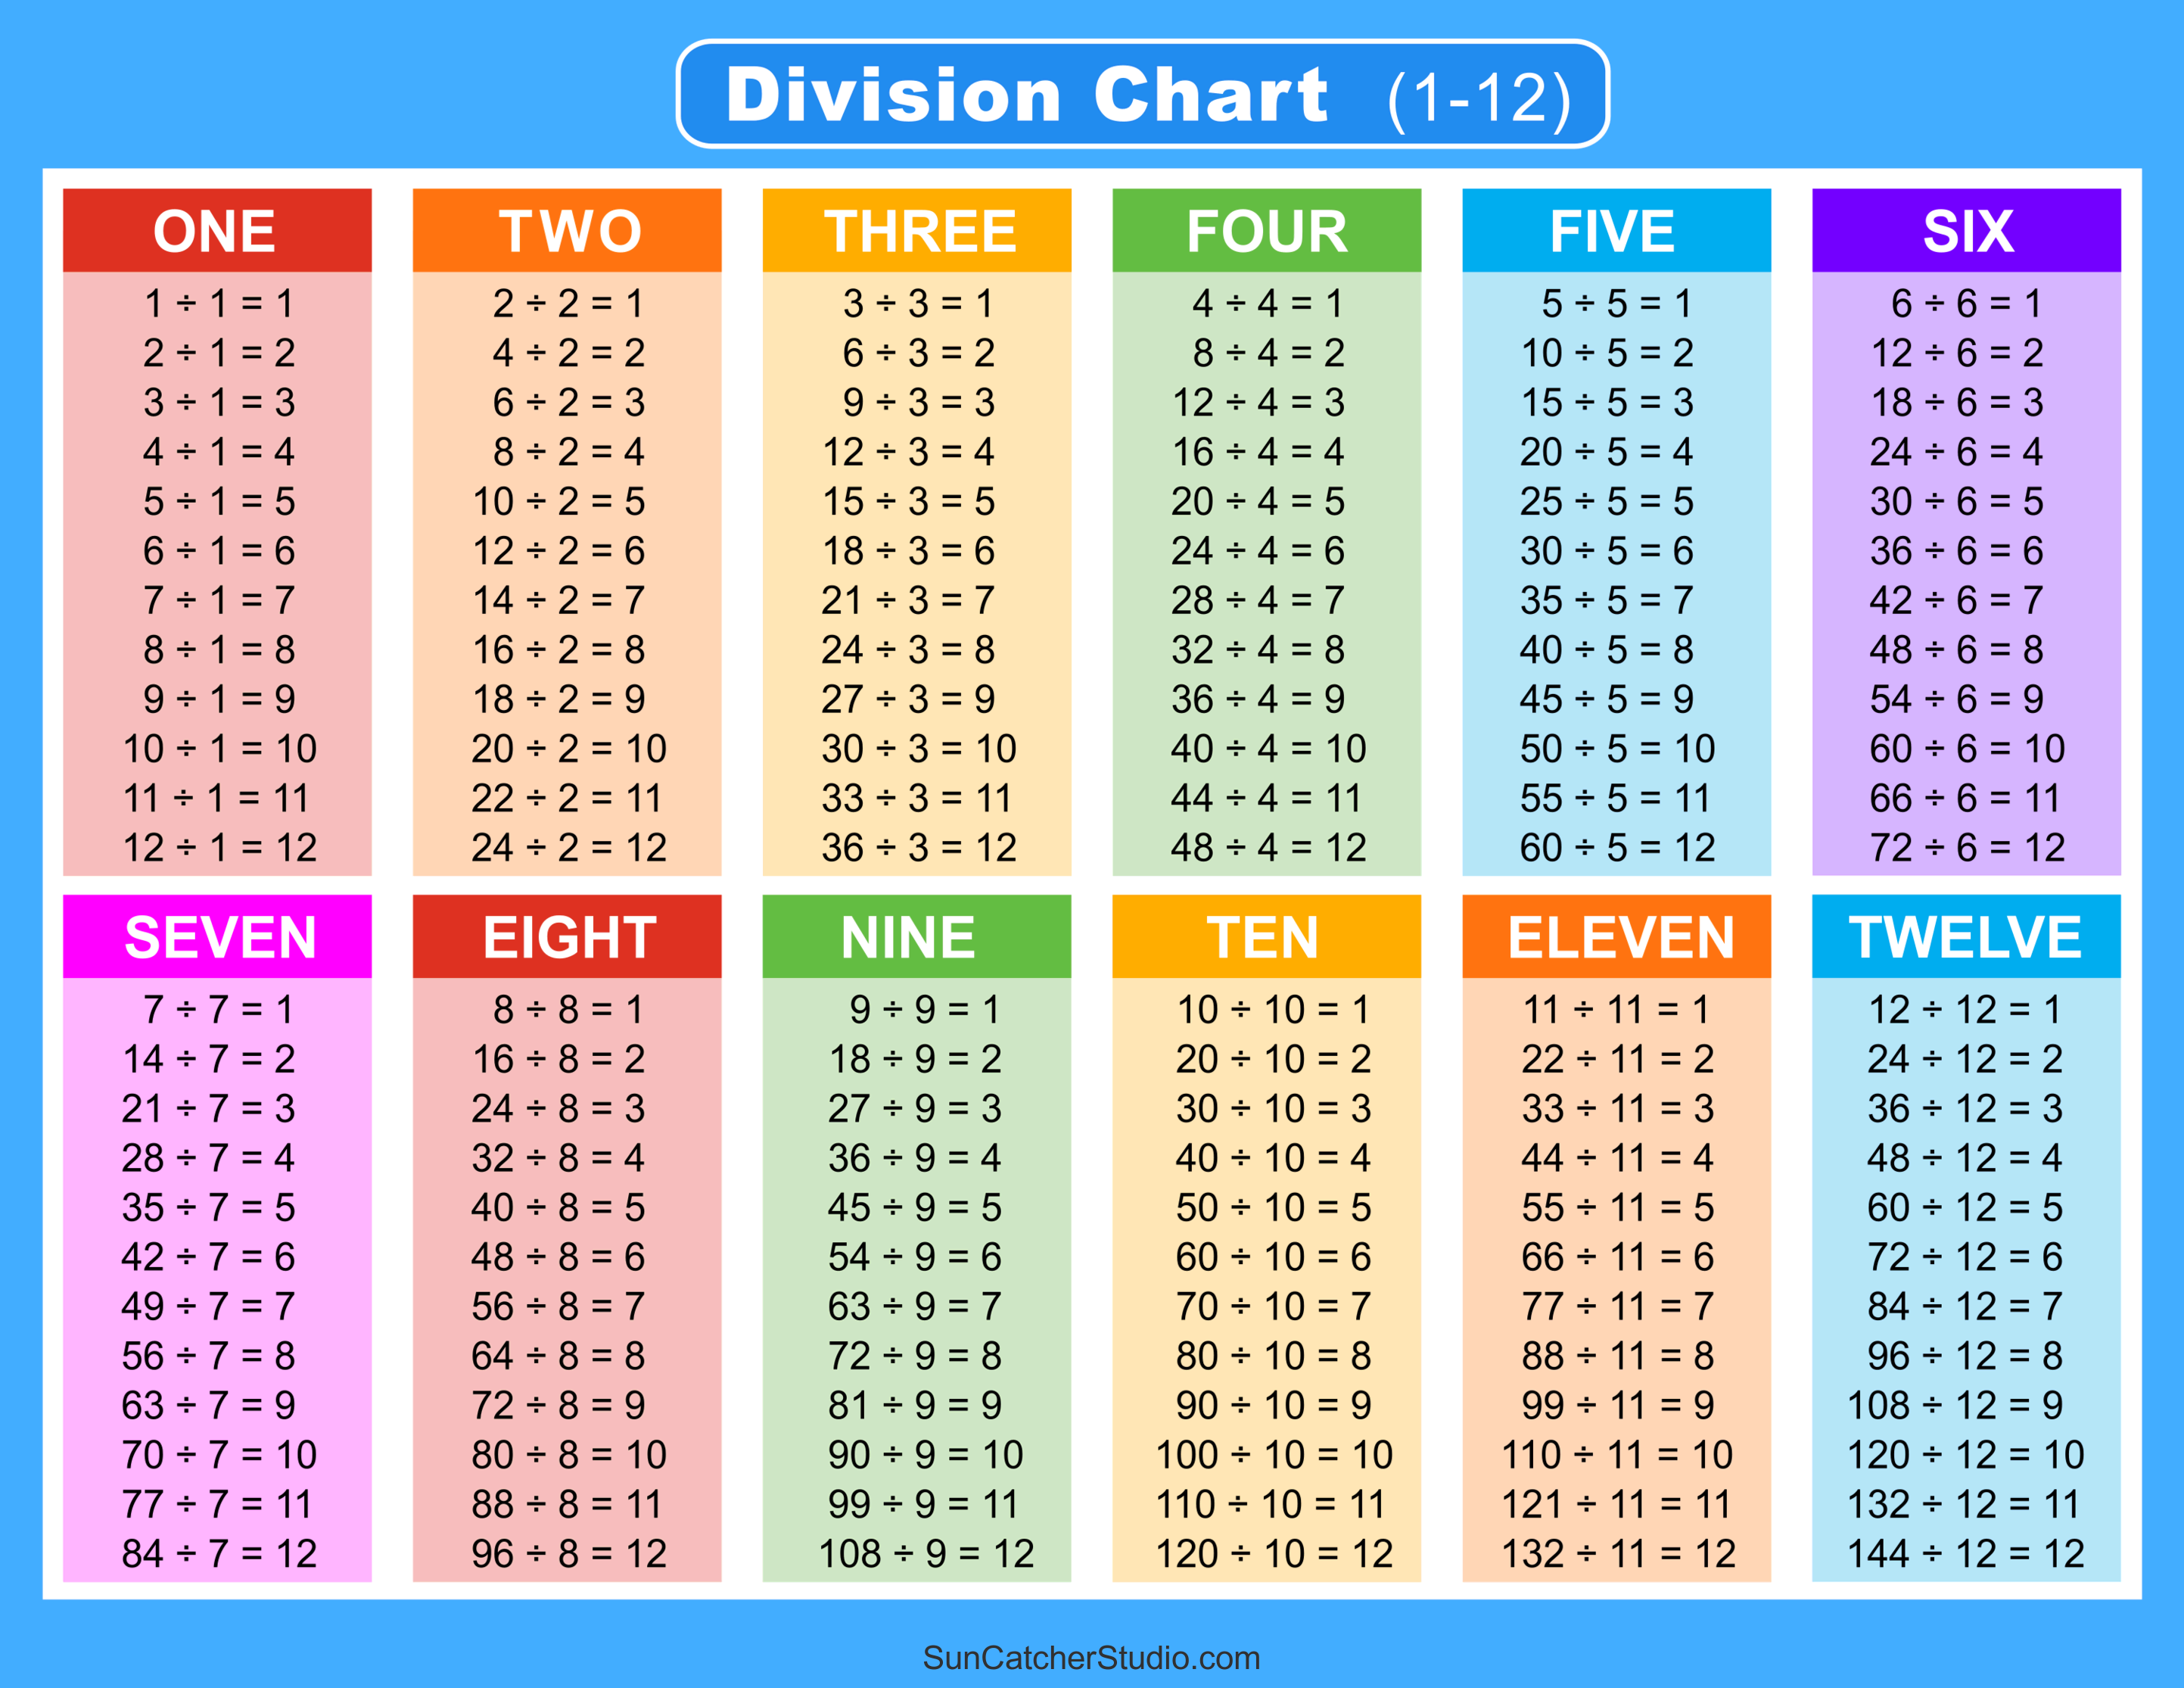 Division Chart Printable Paper Trail Design 46% OFF